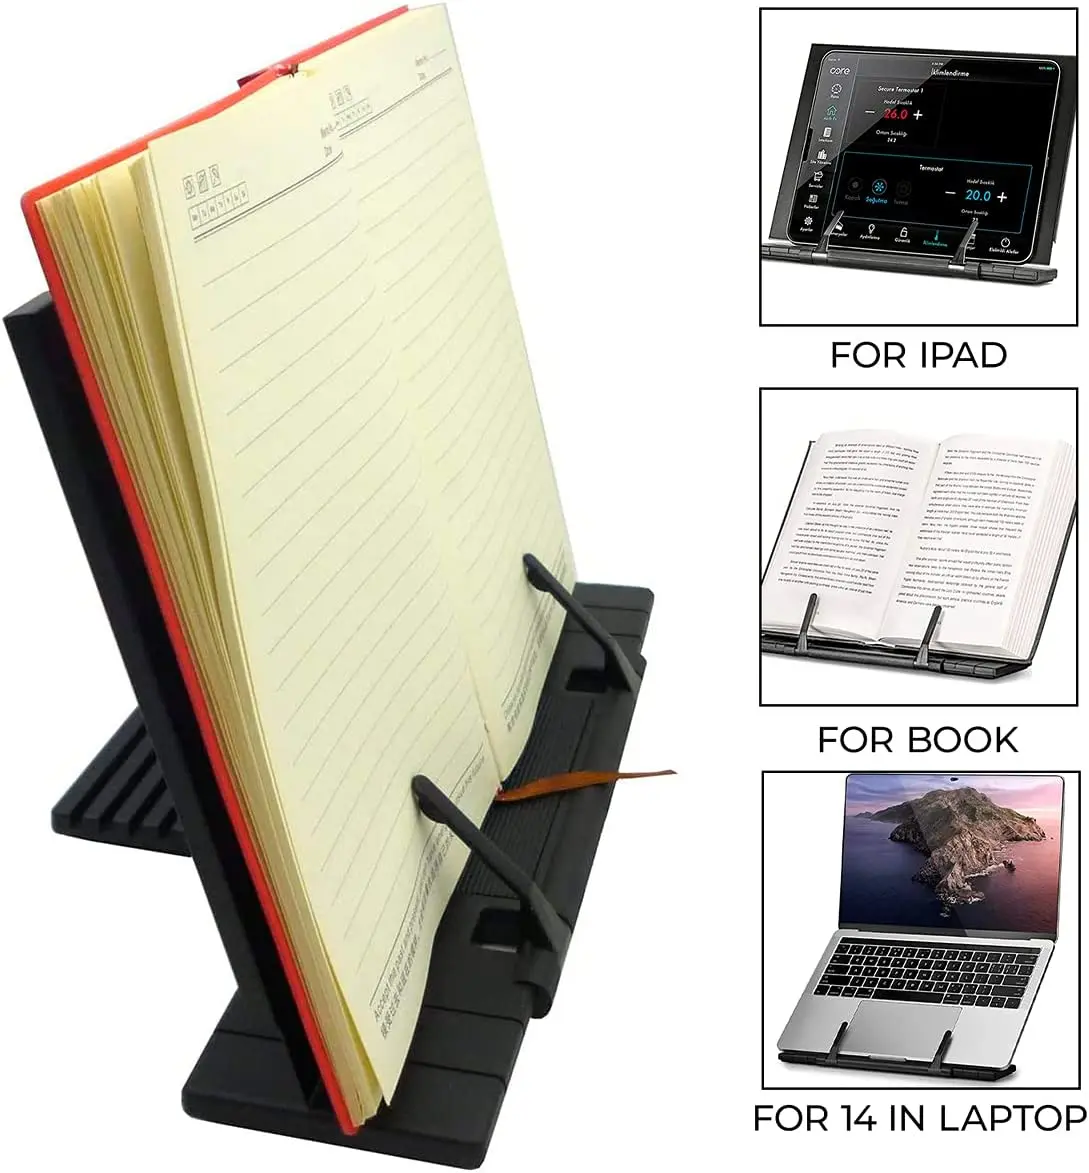 

Book Stand,Adjustable Foldable Book Holder With Page Paper Clip,Desk Reading Rest Bookstand,Textbooks Cookbook Recipe Book Stand